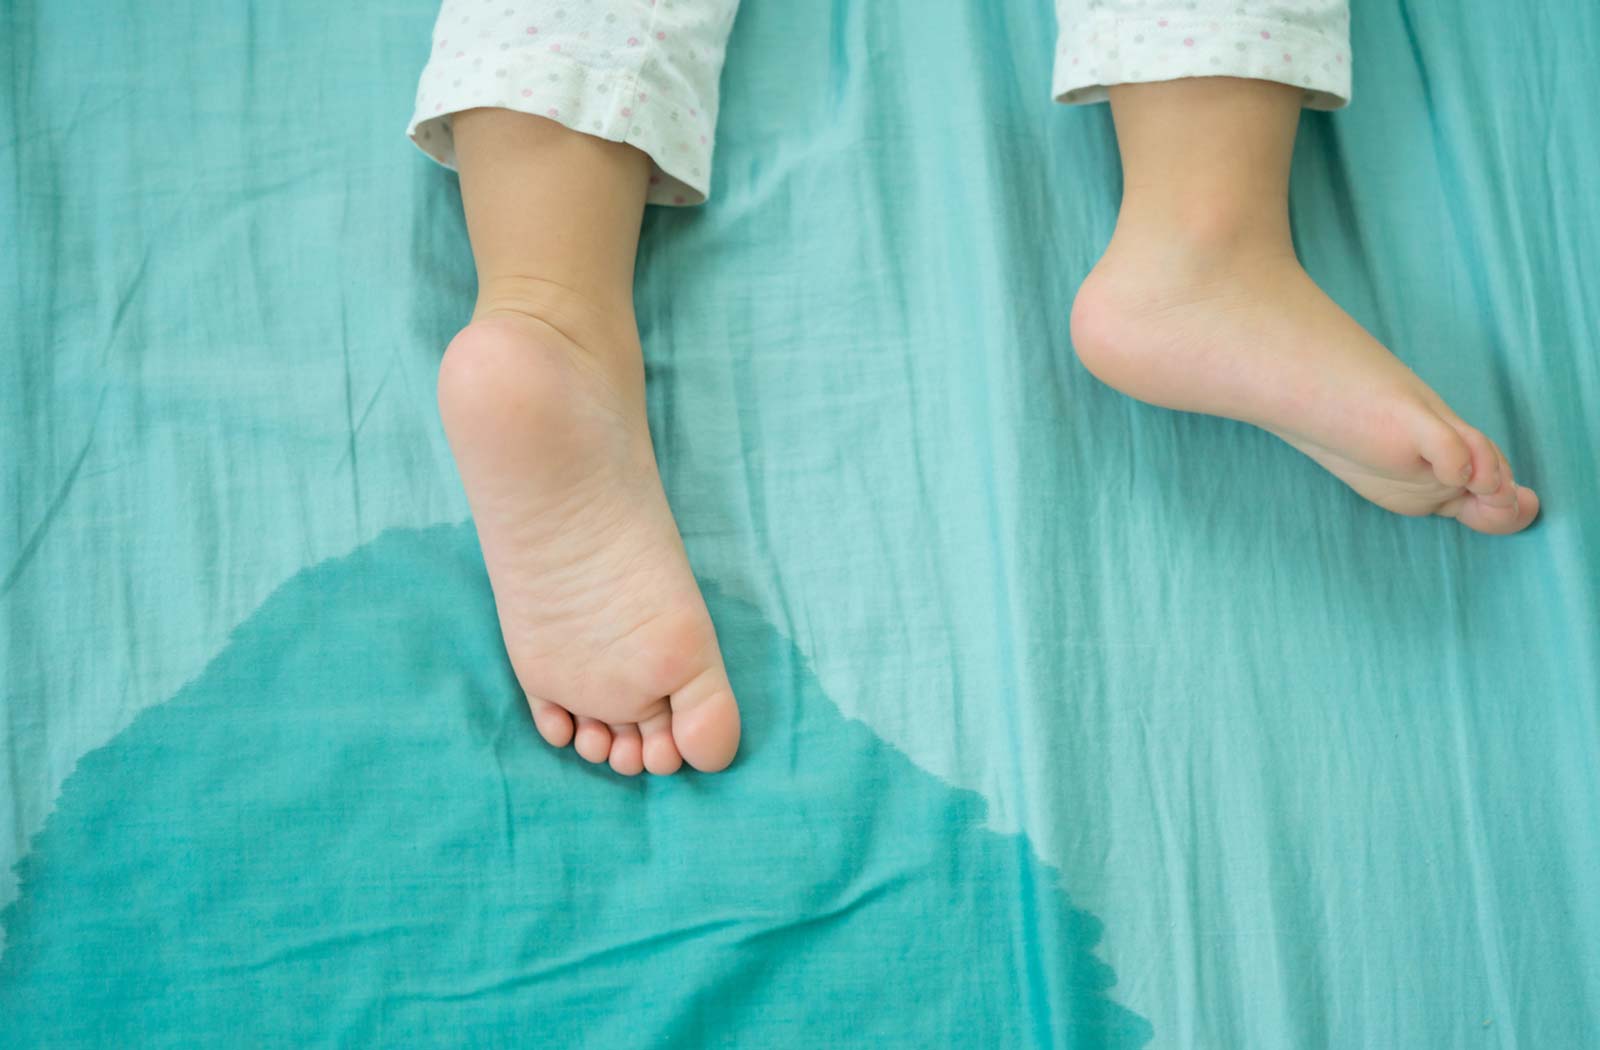 Will My Son Ever Stop Wetting the Bed?